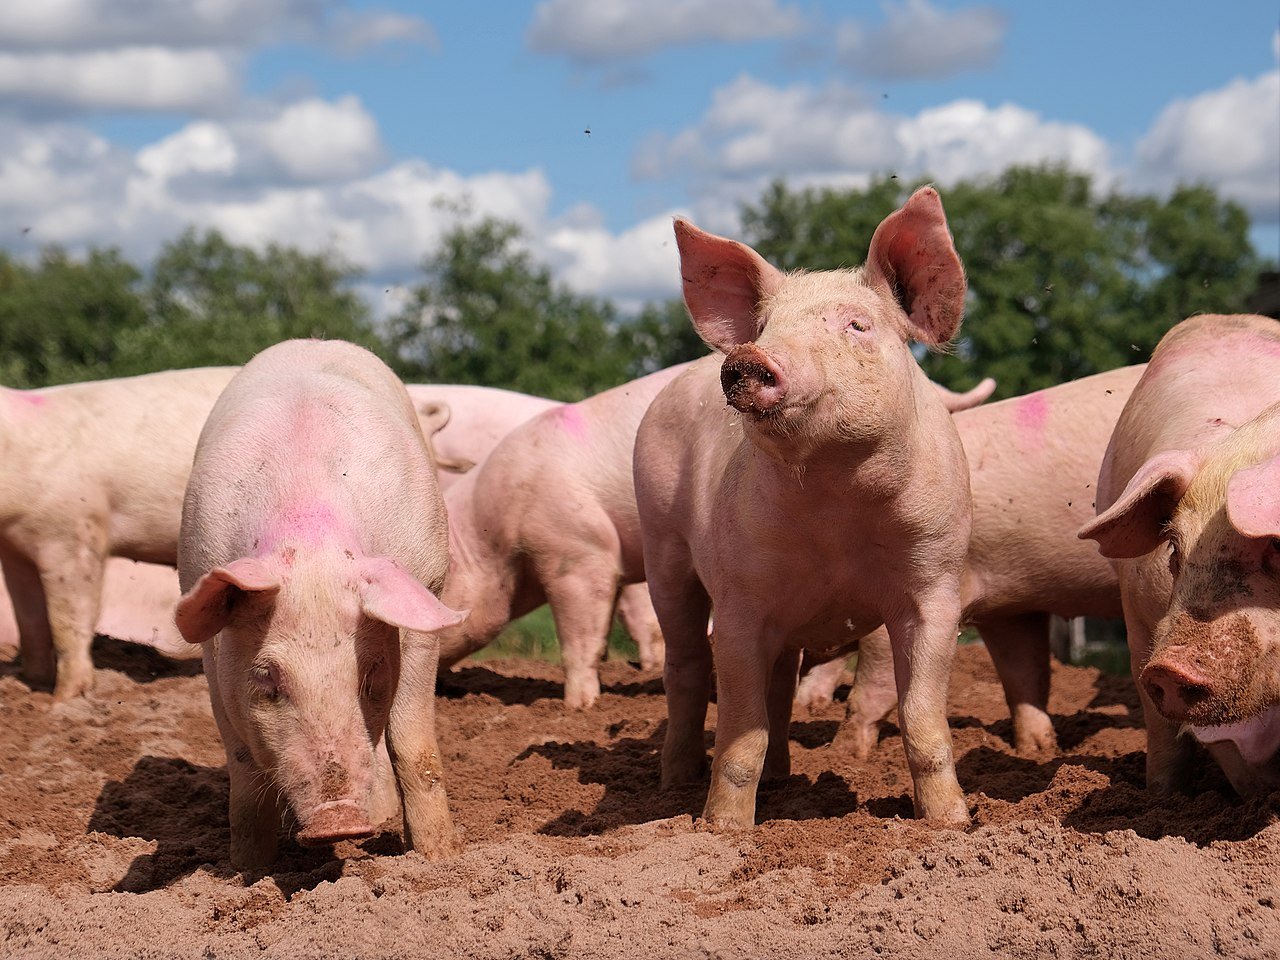 Robots clone pigs, or How to develop artificial intelligence